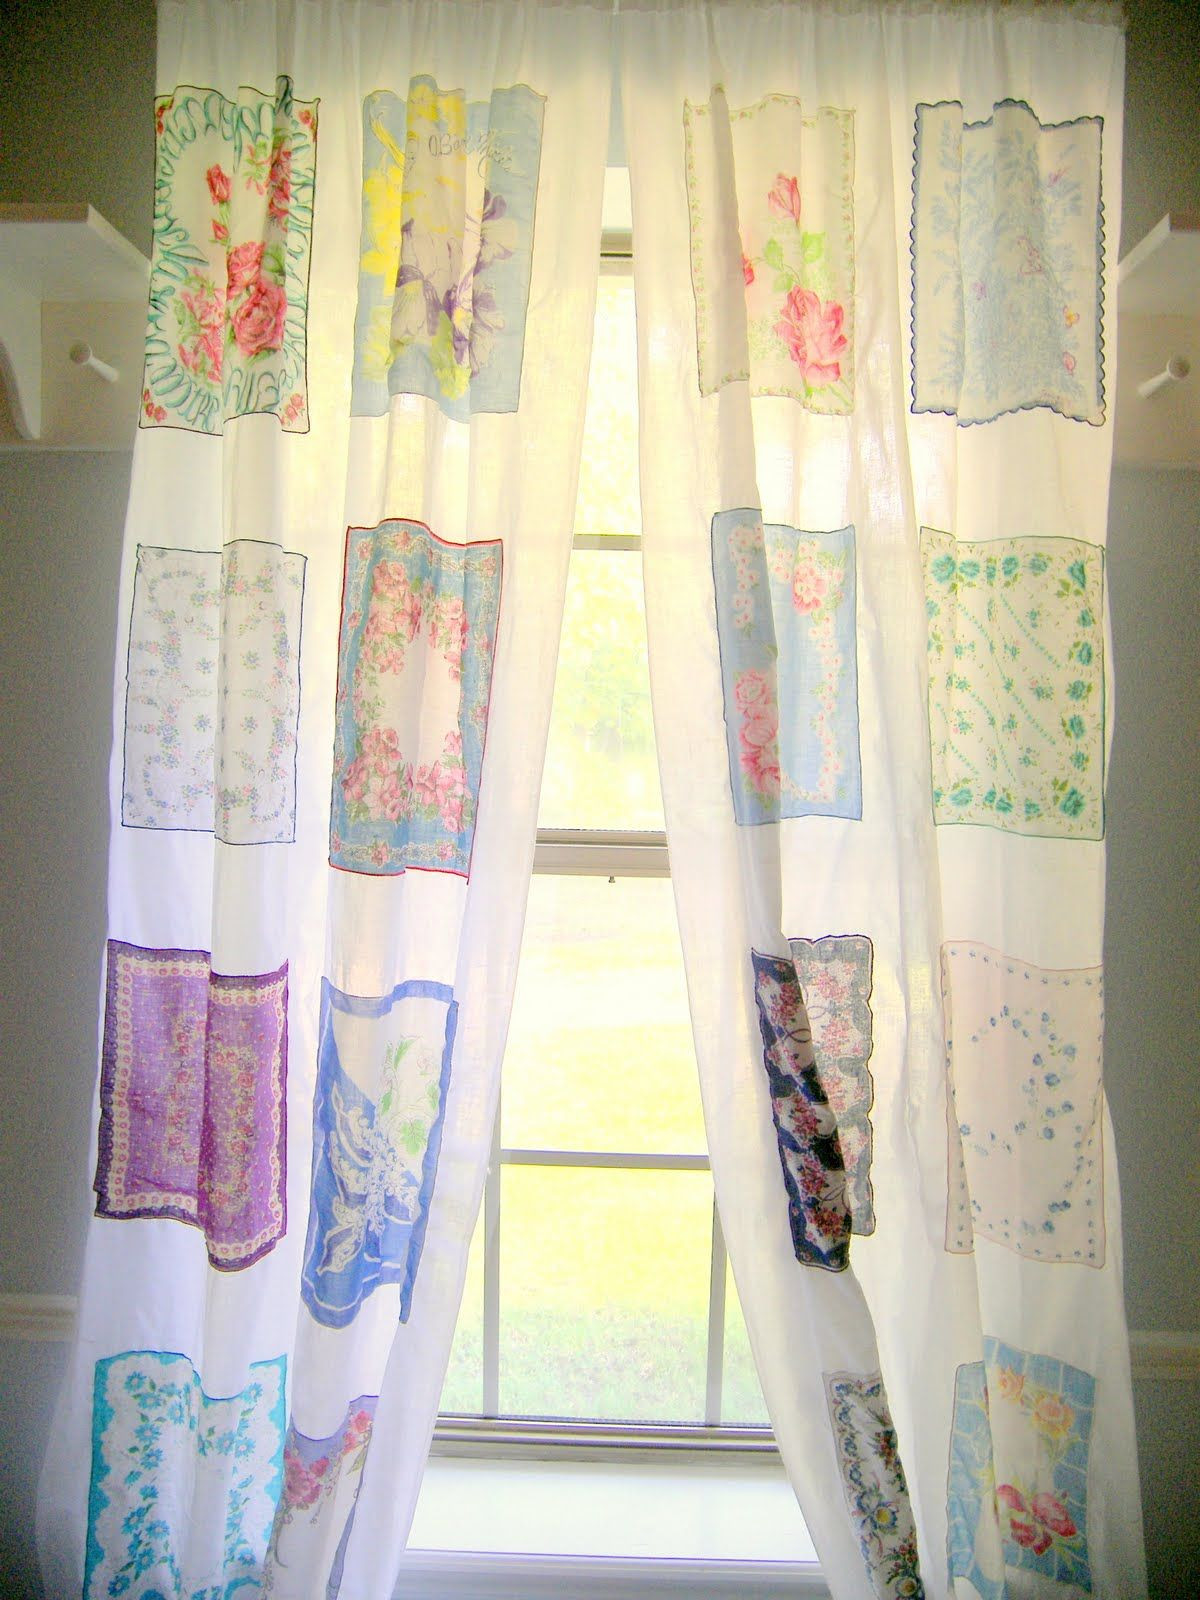 13 Lovable Hoosier Glass Vase 4094 2024 free download hoosier glass vase 4094 of gorgeous curtains made from vintage hankies this one is with regard to gorgeous curtains made from vintage hankies this one is particularly pretty